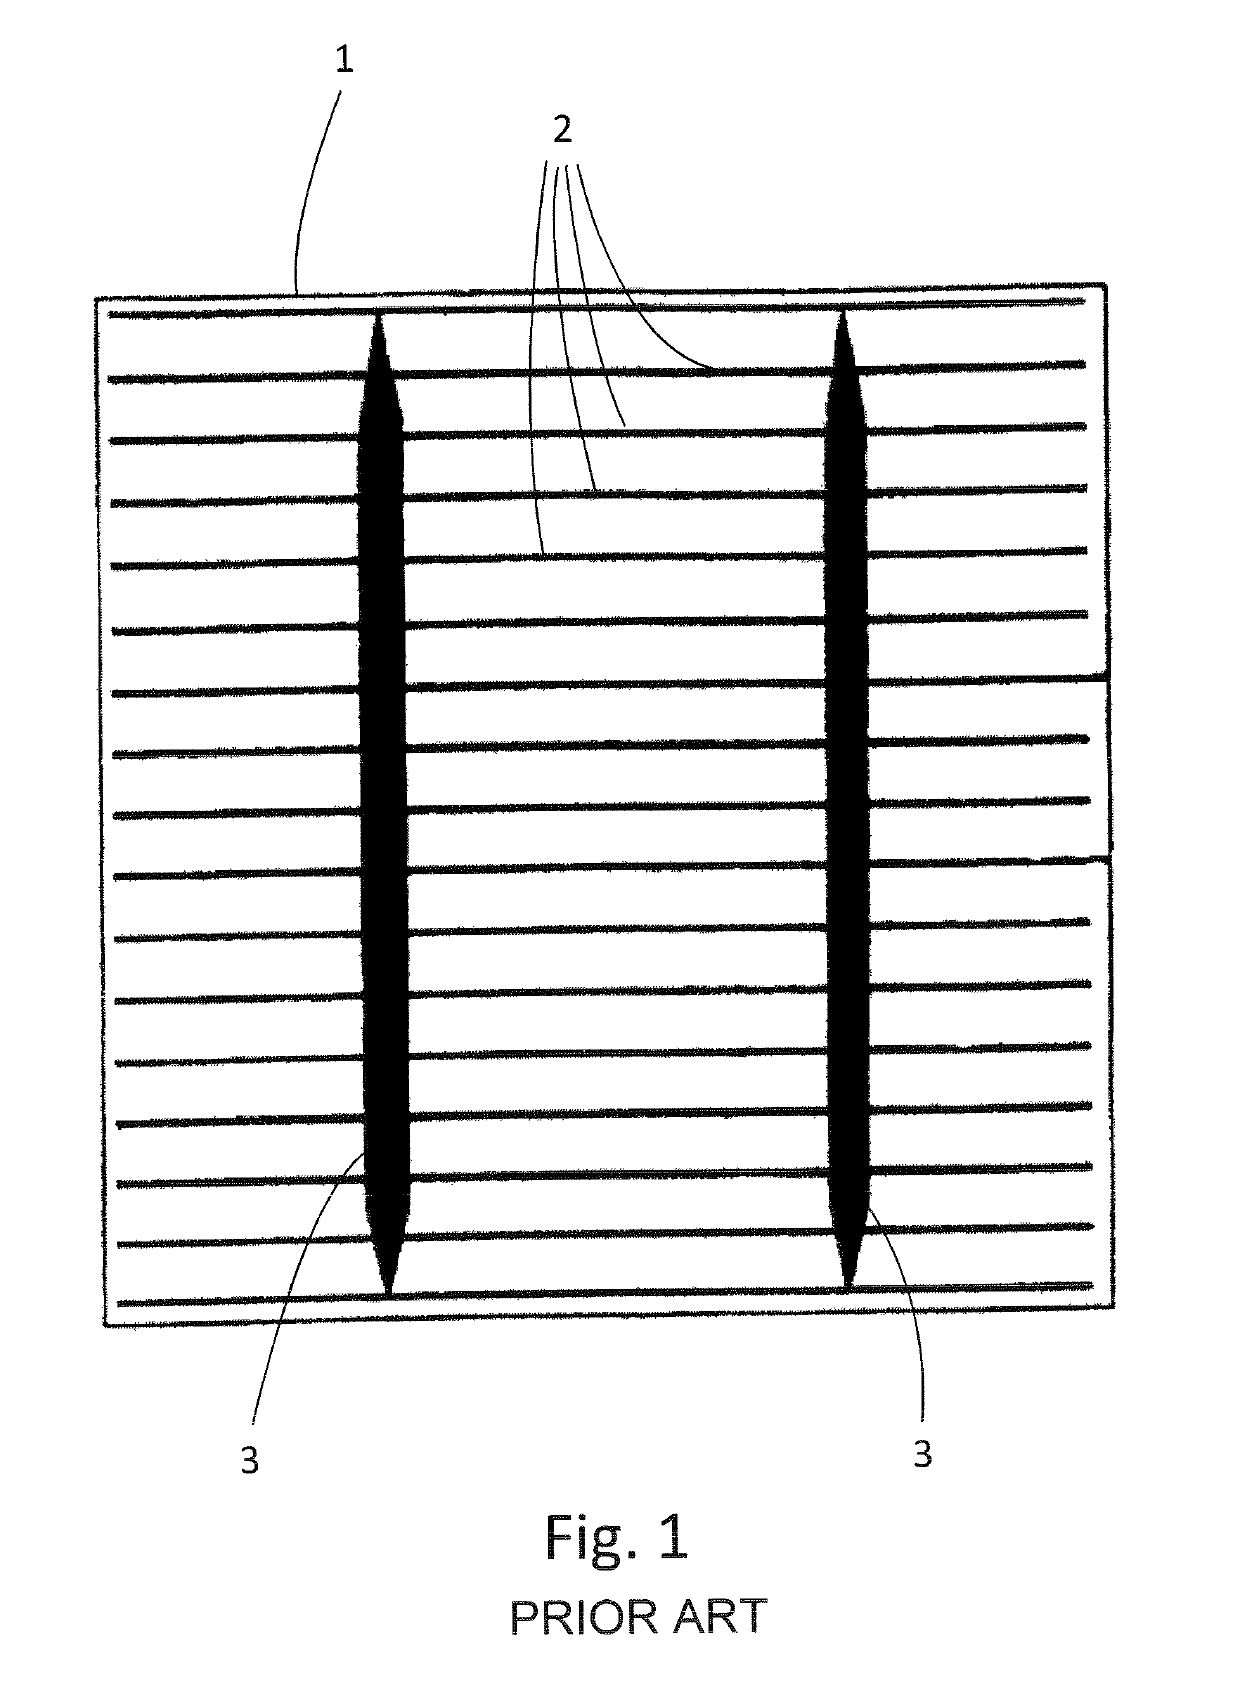 Photovoltaic cell having discontinuous conductors